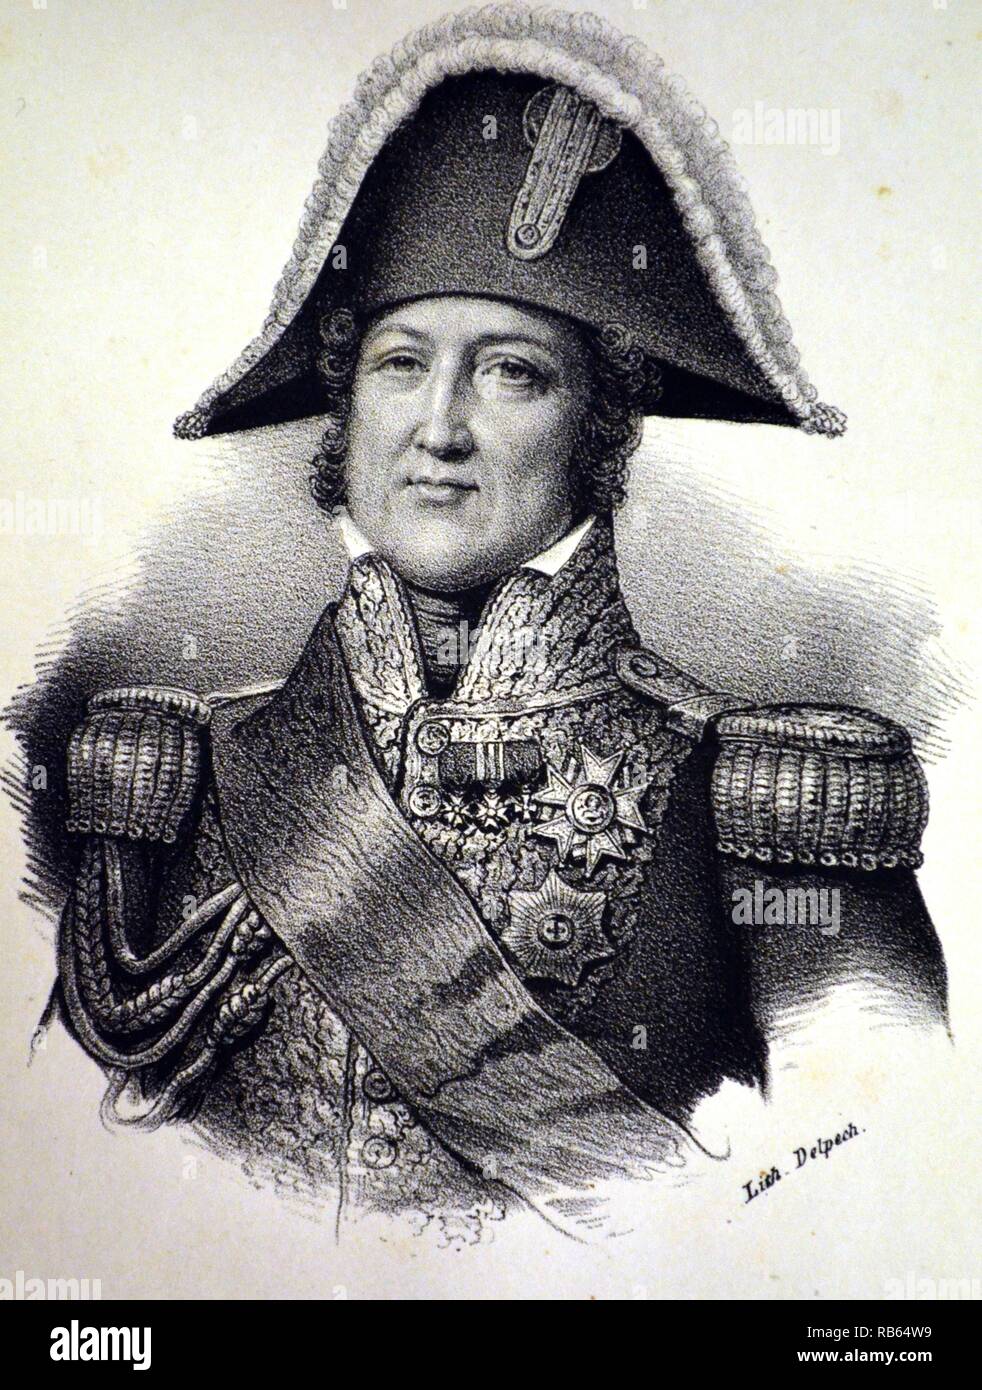 Louis Philippe I: Louis Philippe of Orleans (1773-1850) King of France 1830-1848. Lithograph, Paris, c1840. Stock Photo